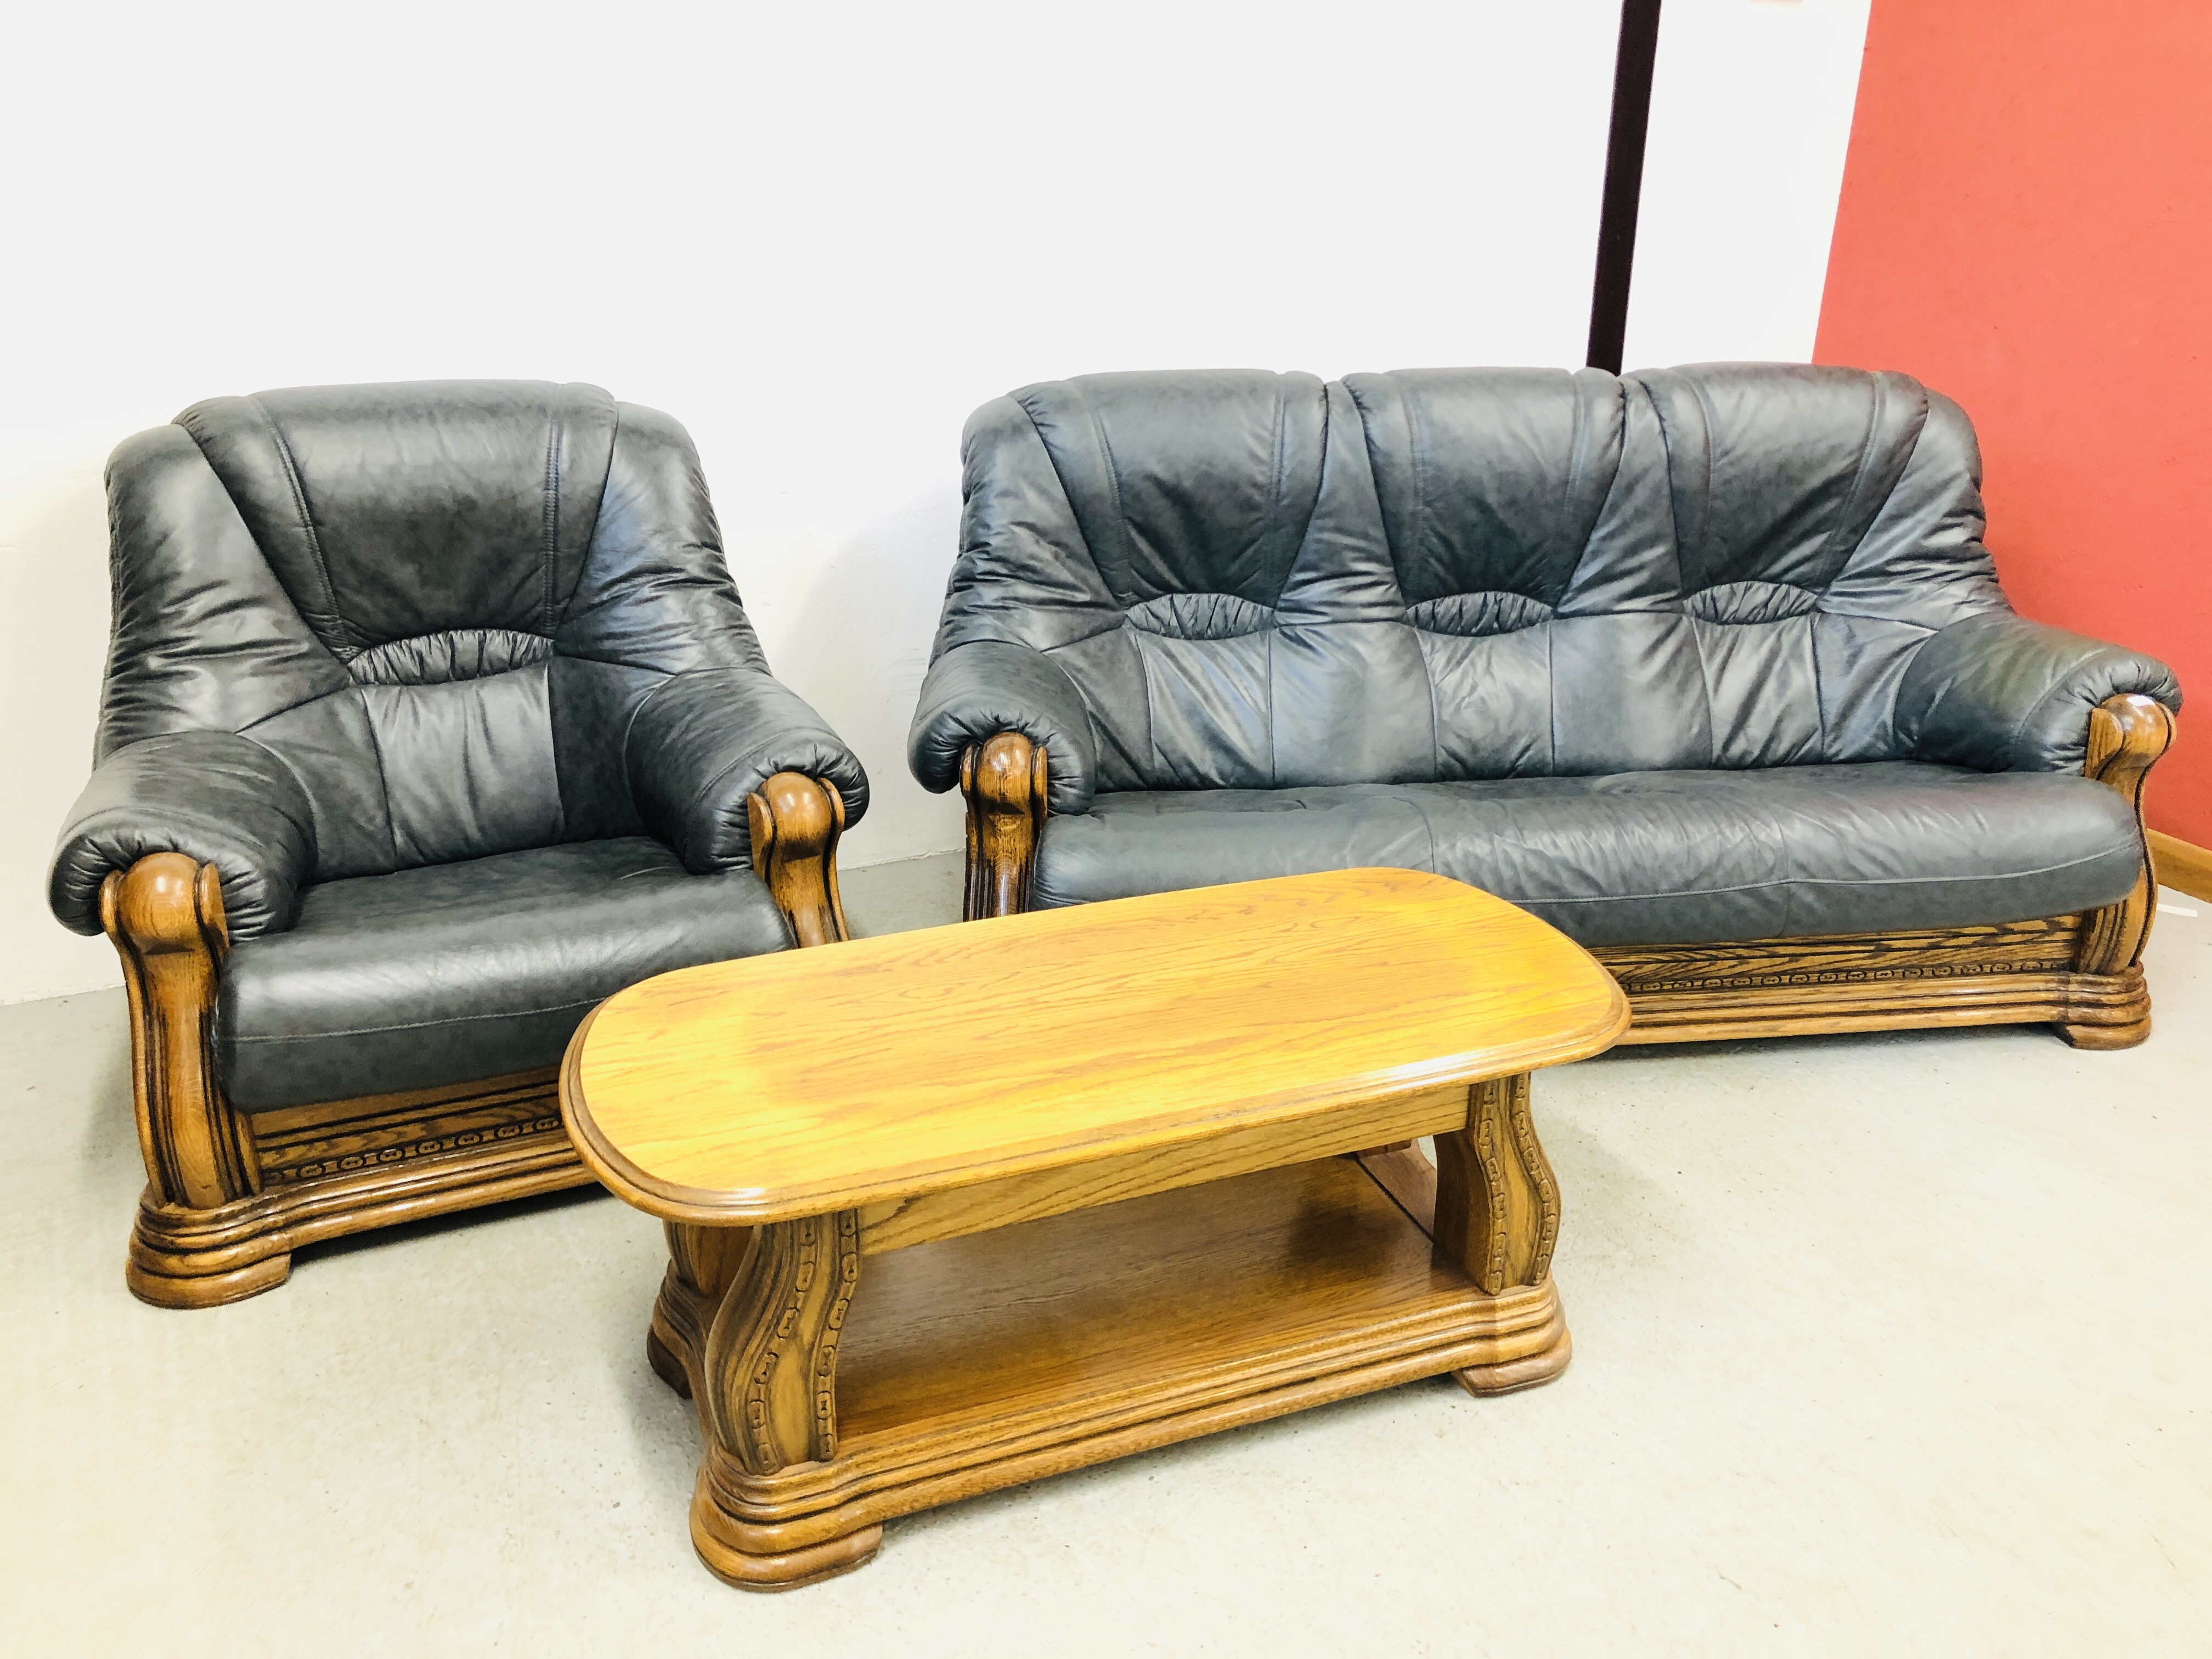 A NAVY BLUE 3 SEATER SOFA AND ARM CHAIR WITH CARVED WOOD SURROUND AND MATCHING OAK COFFEE TABLE - Image 2 of 13